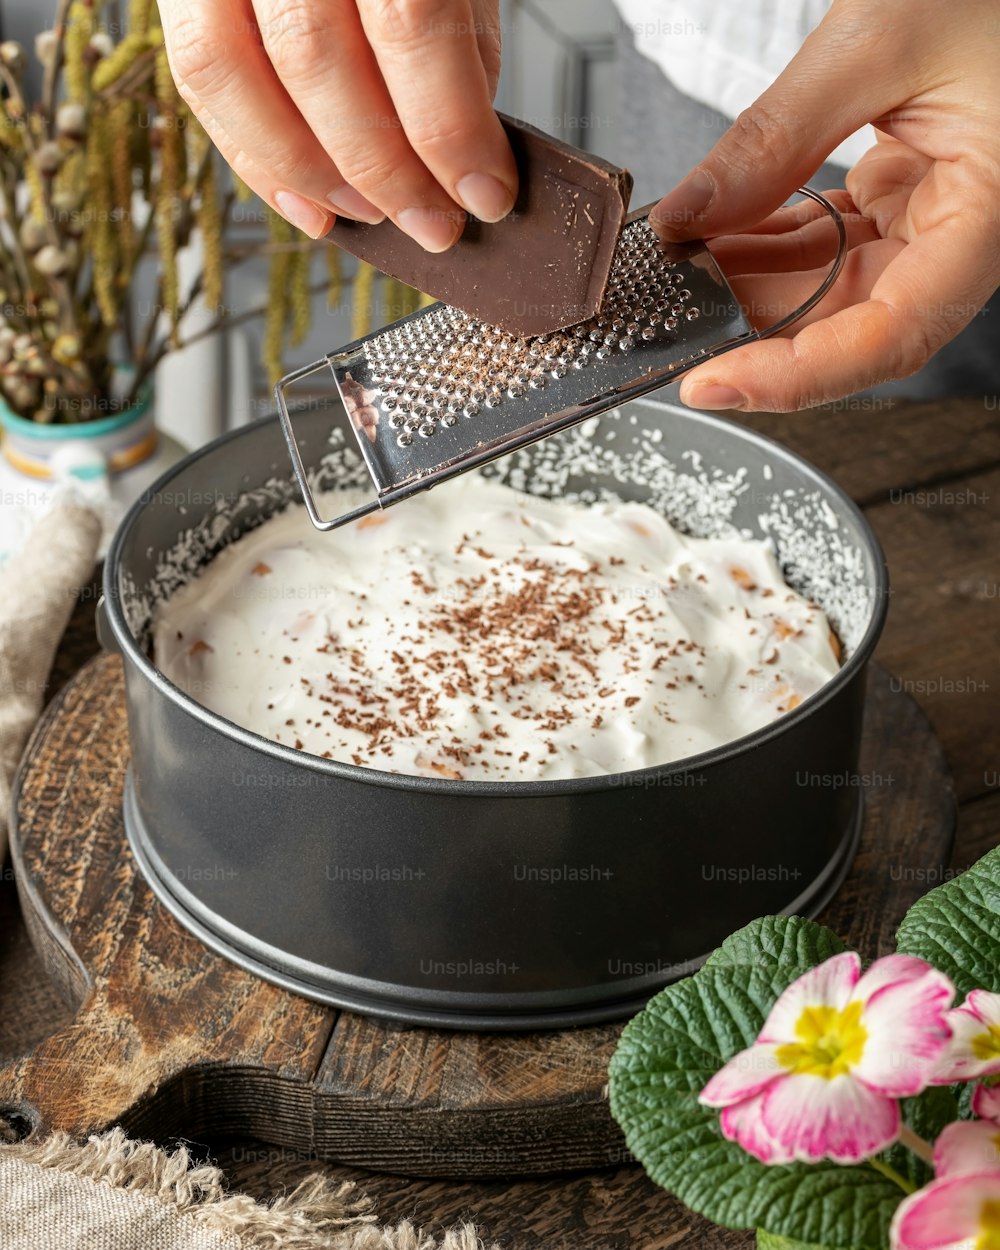 Preparation of a no-bake cake made from sour cream and sponge biscuits - grating chocolate